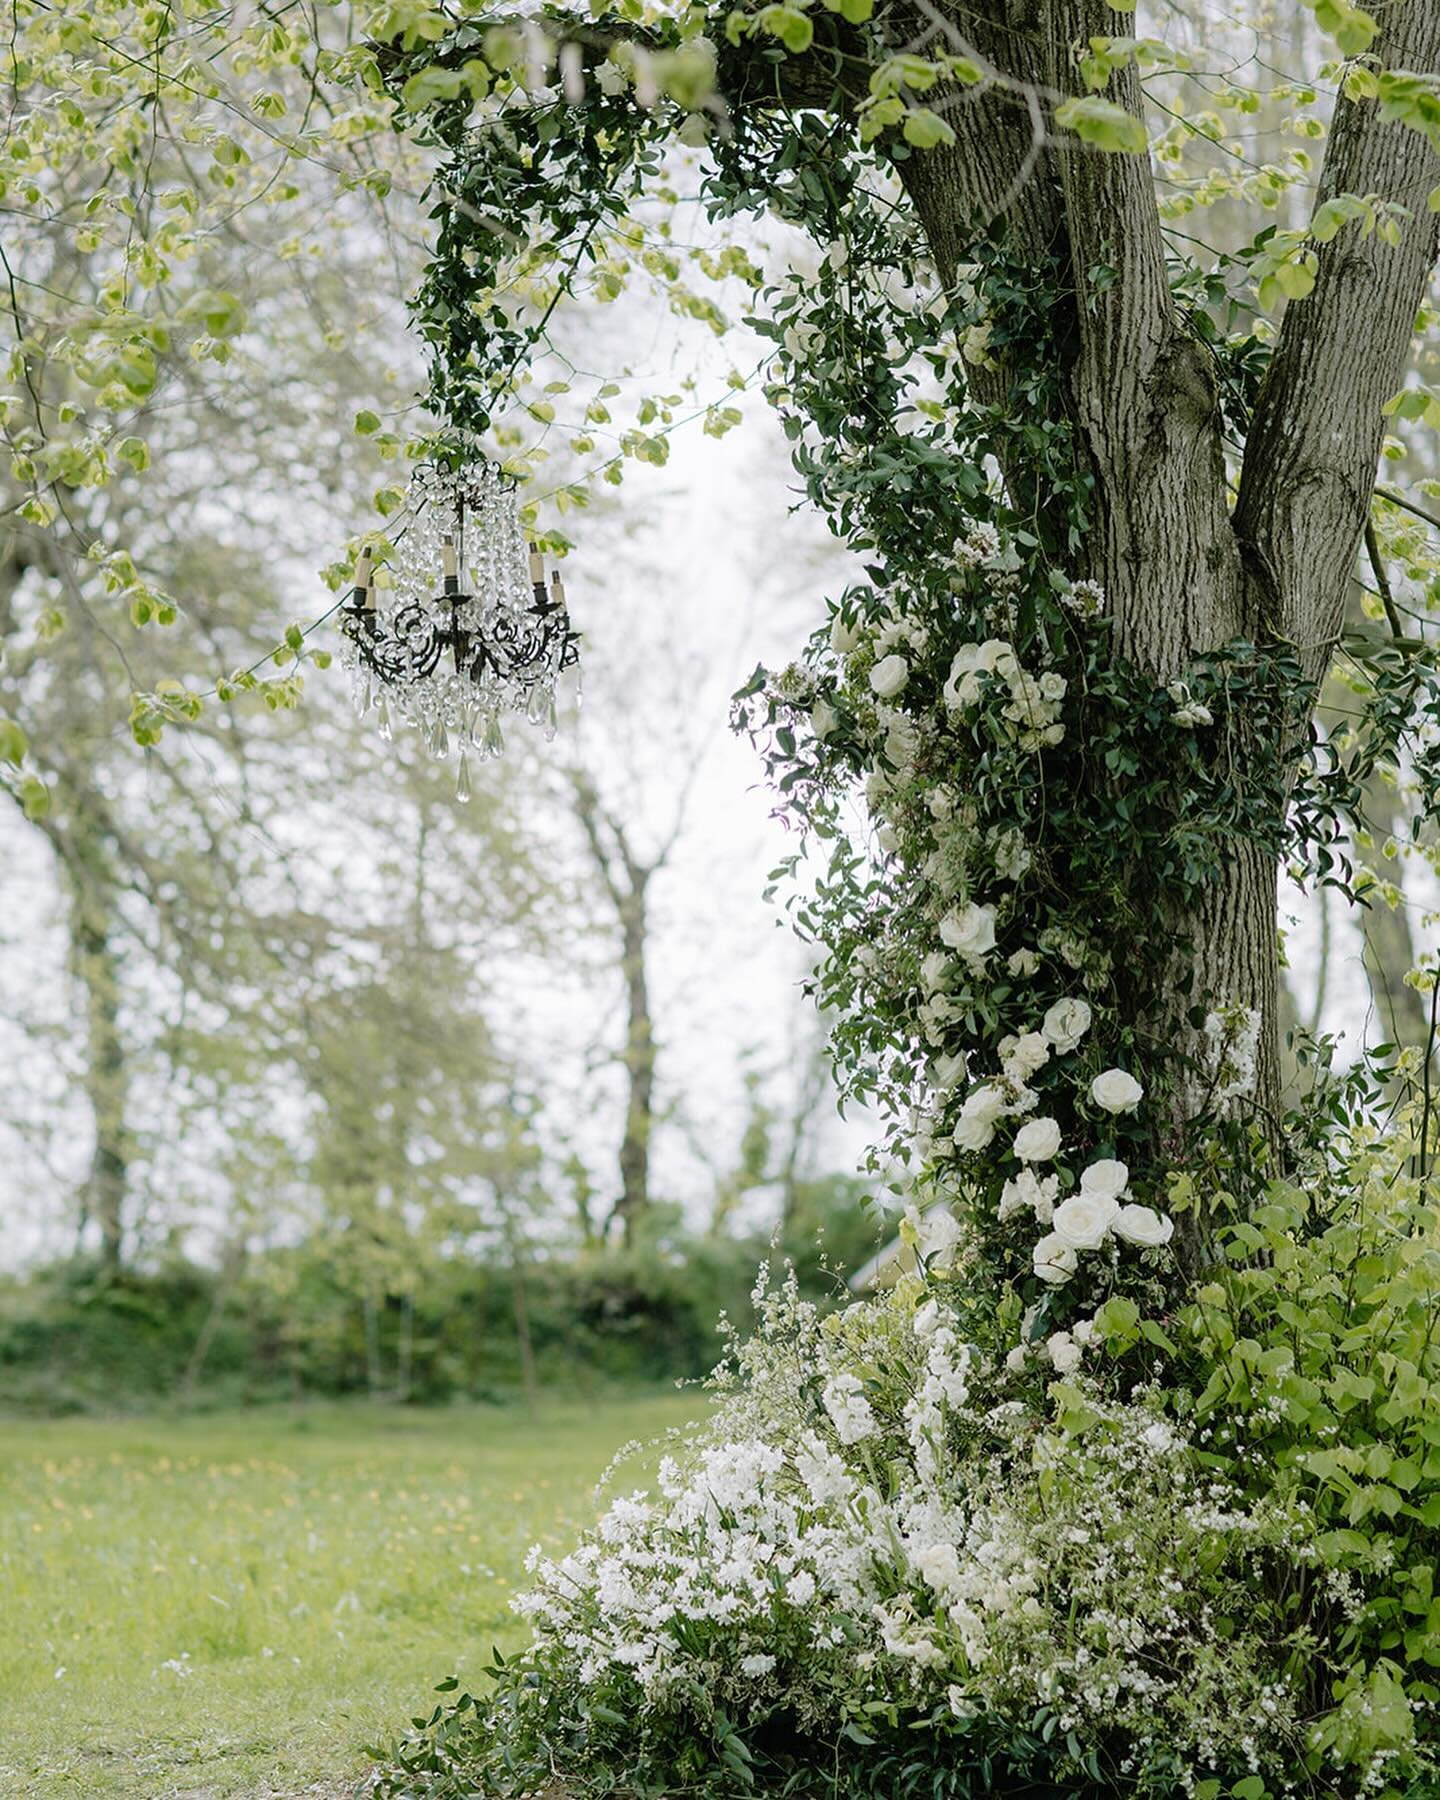 Outdoor ceremony flowers 🌿

My favourite installation from our wonderful #lesfleurs24 Retreat. I love the classic, elegant white and green colour palette and how perfectly the flowers suited the place. So natural, as though it had simply grown there